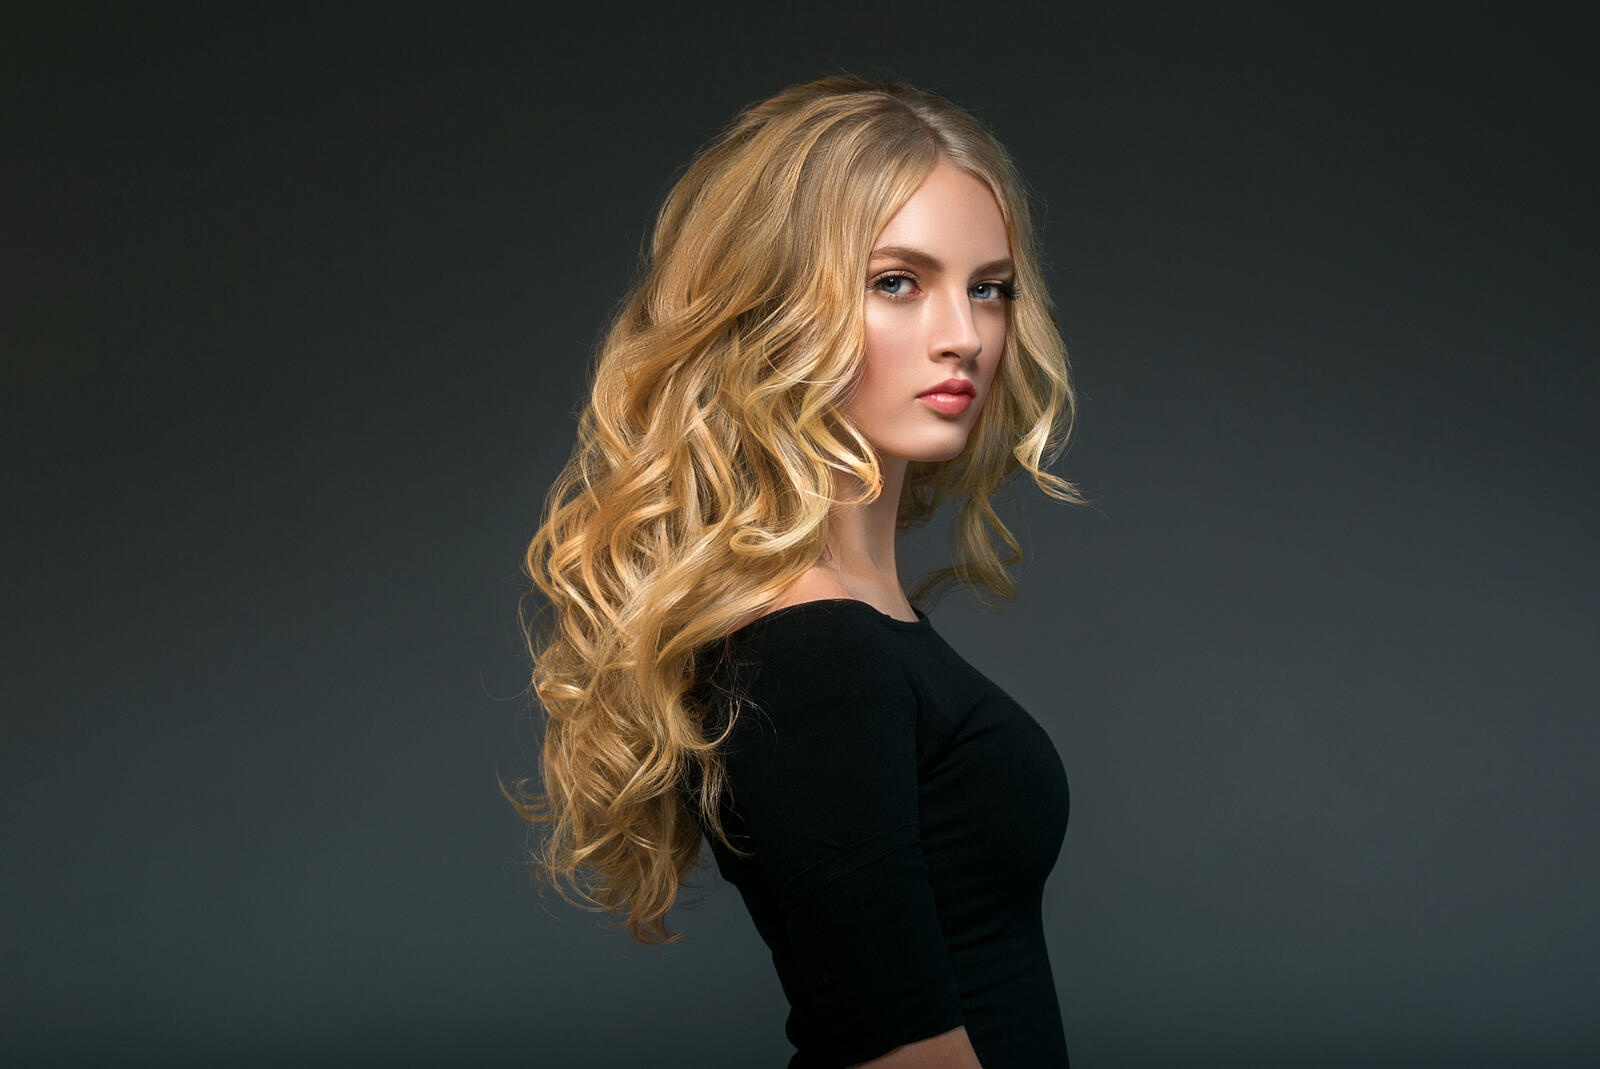 Free photo Girl with blond curly hair in a black turtleneck